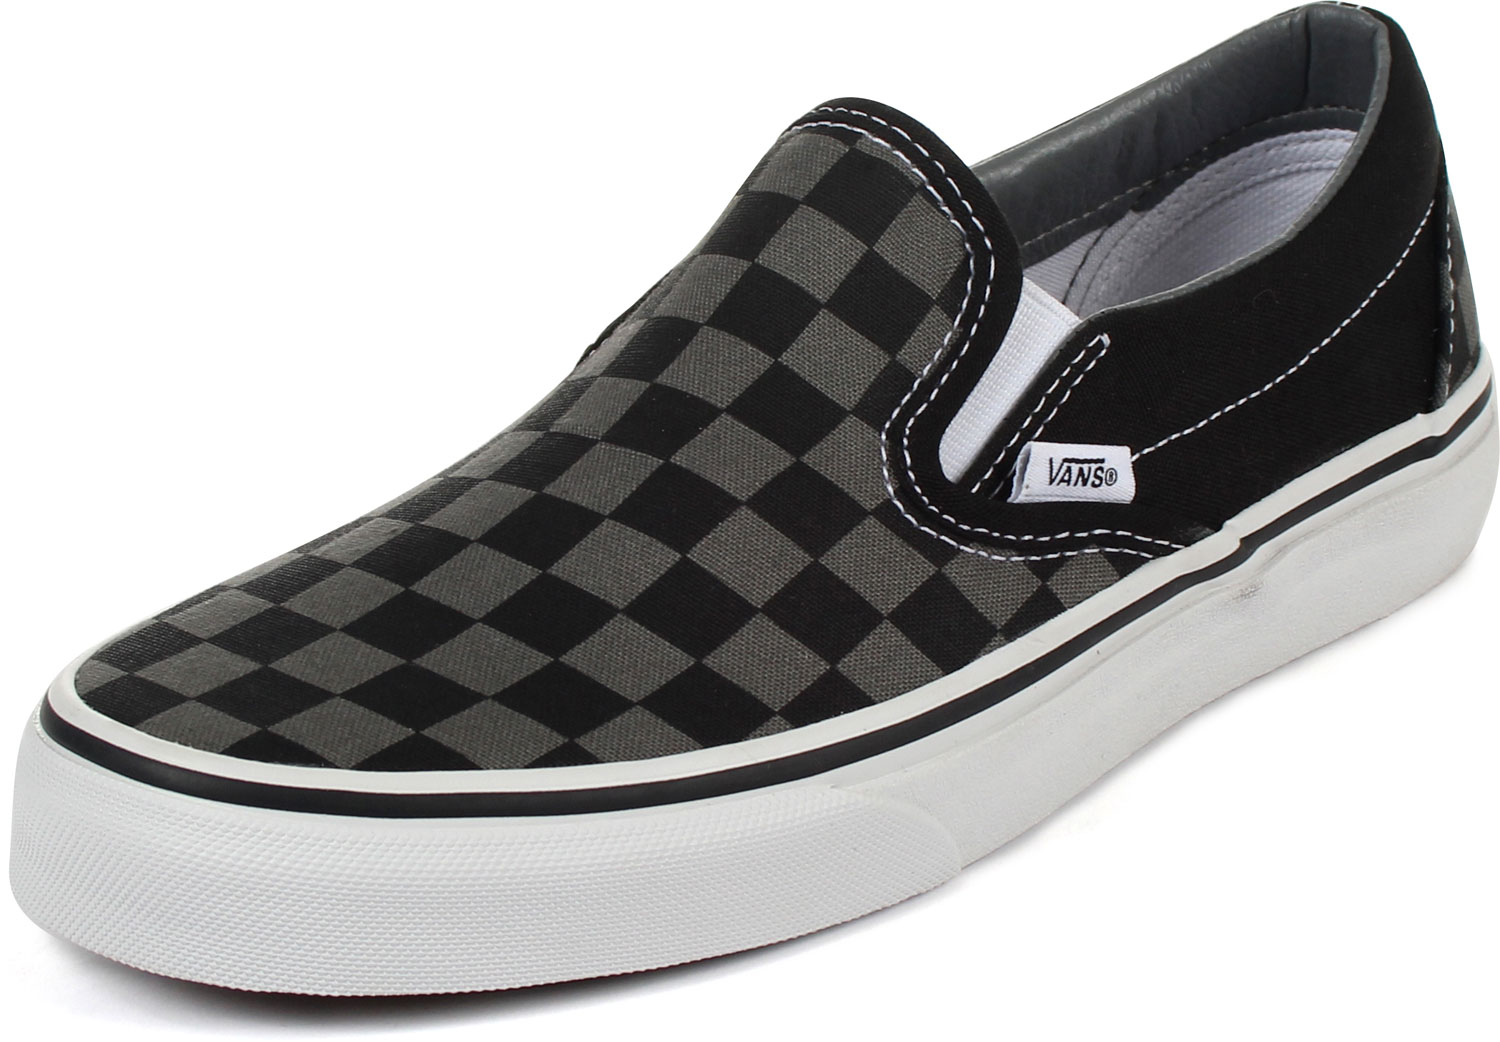 Vans - Unisex Adult Classic Slip-On Shoes In Black/Pewter